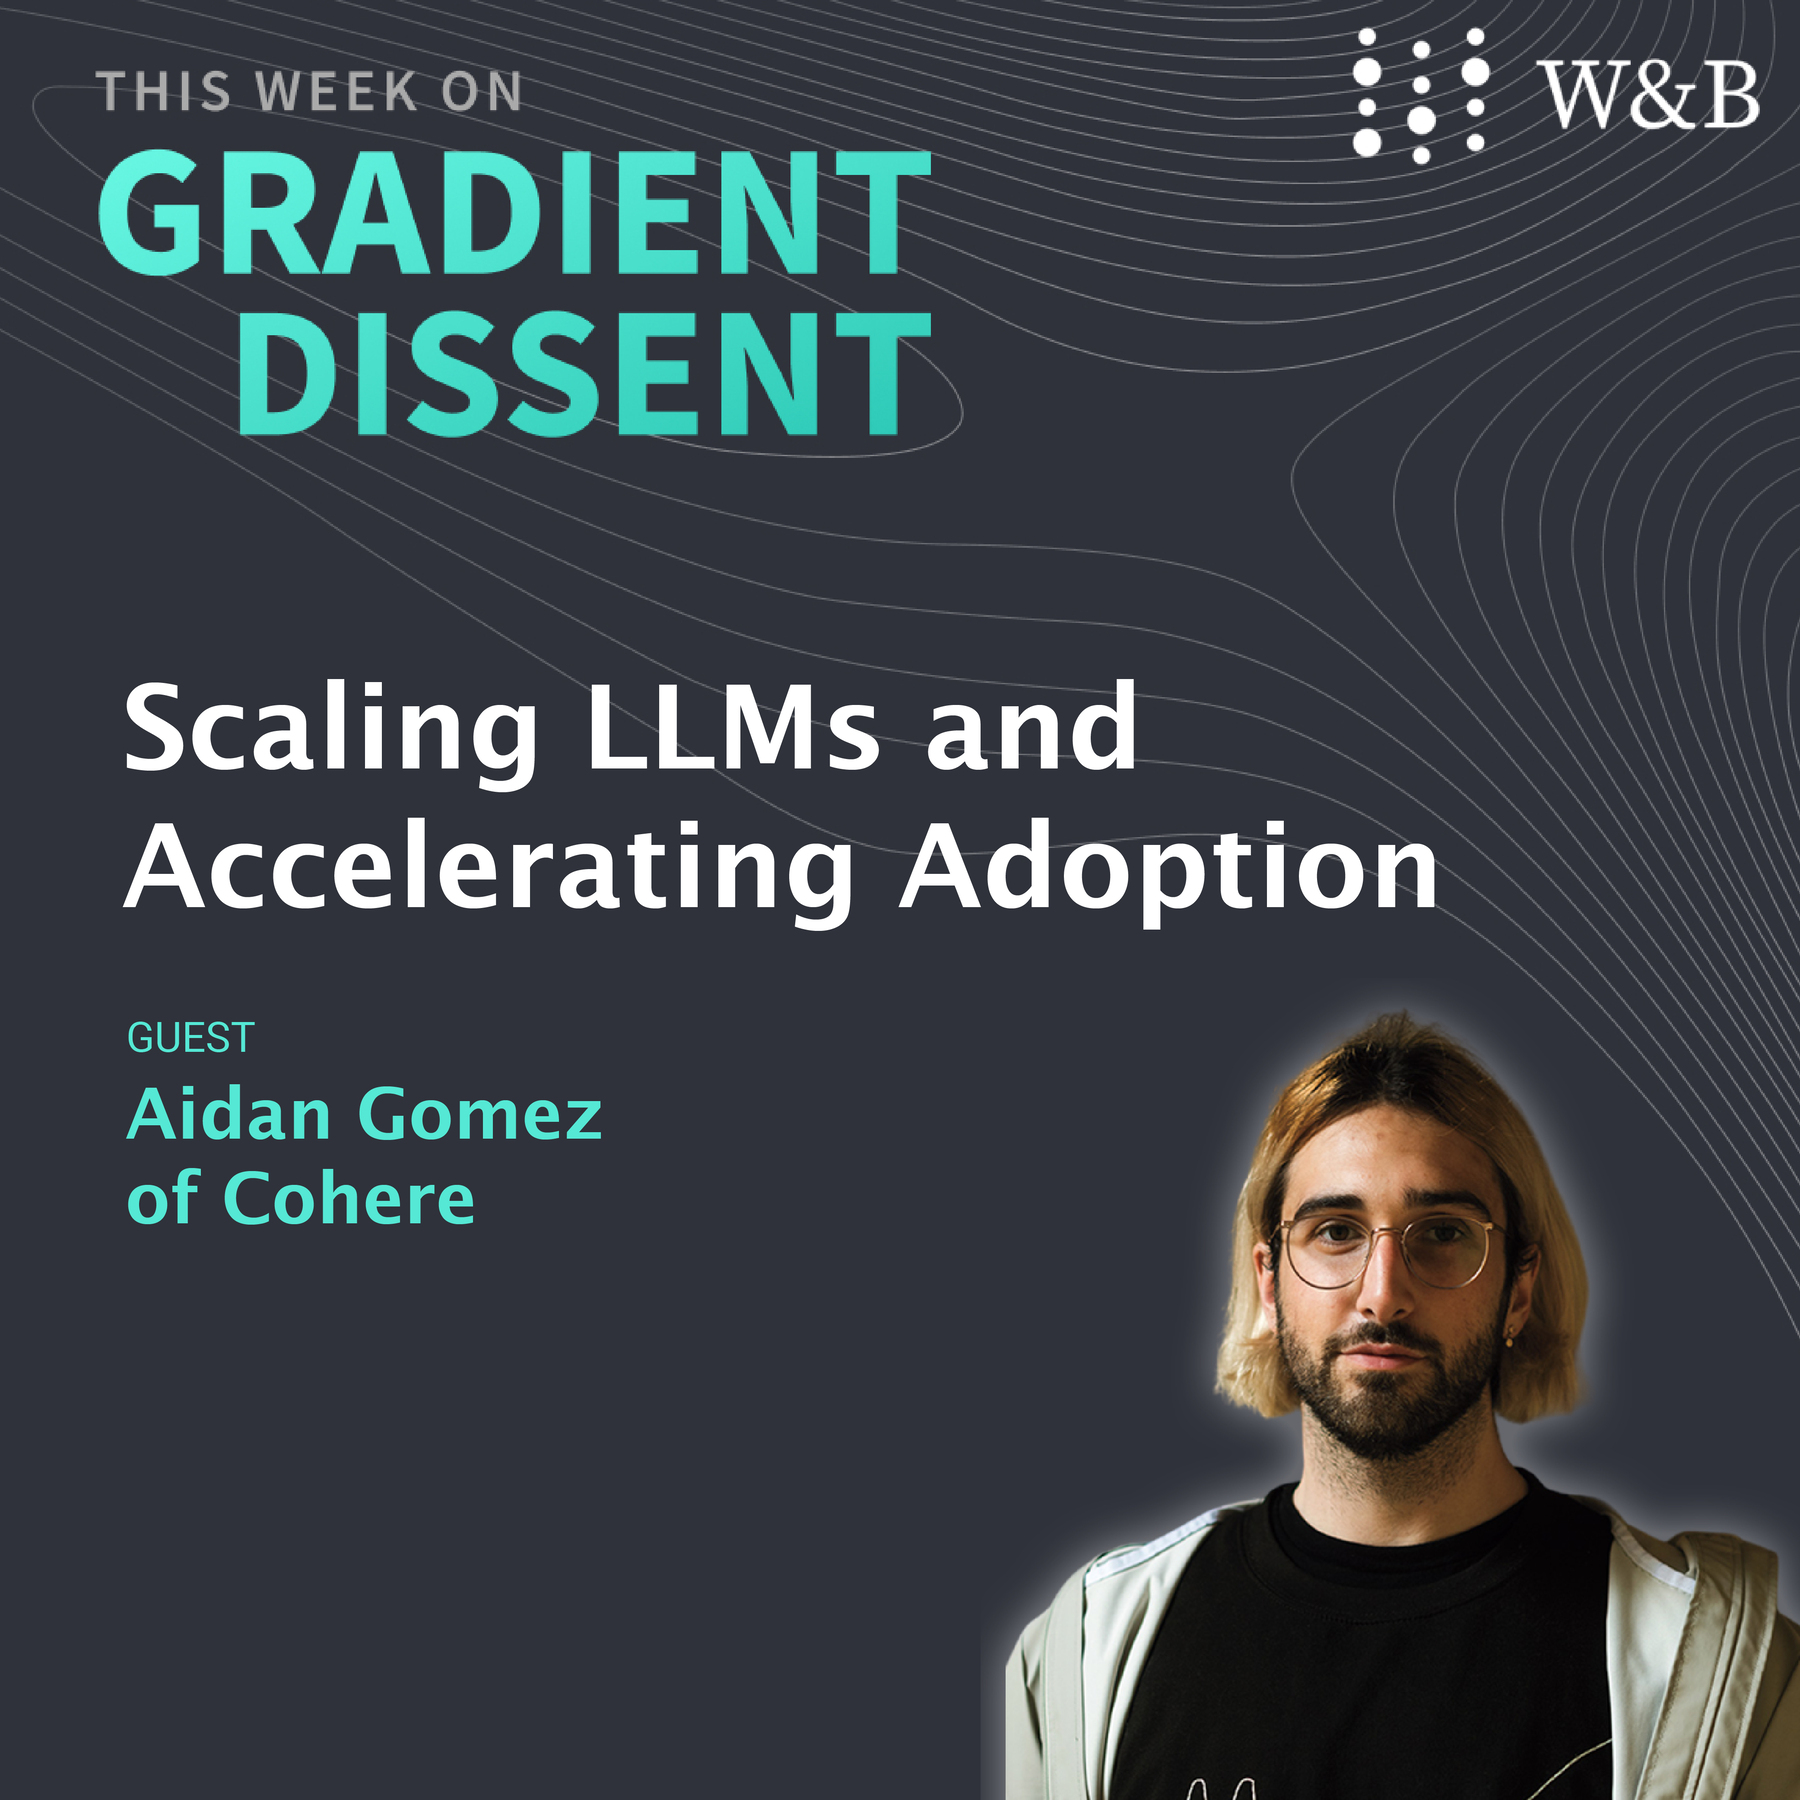 Scaling LLMs and Accelerating Adoption with Aidan Gomez at Cohere